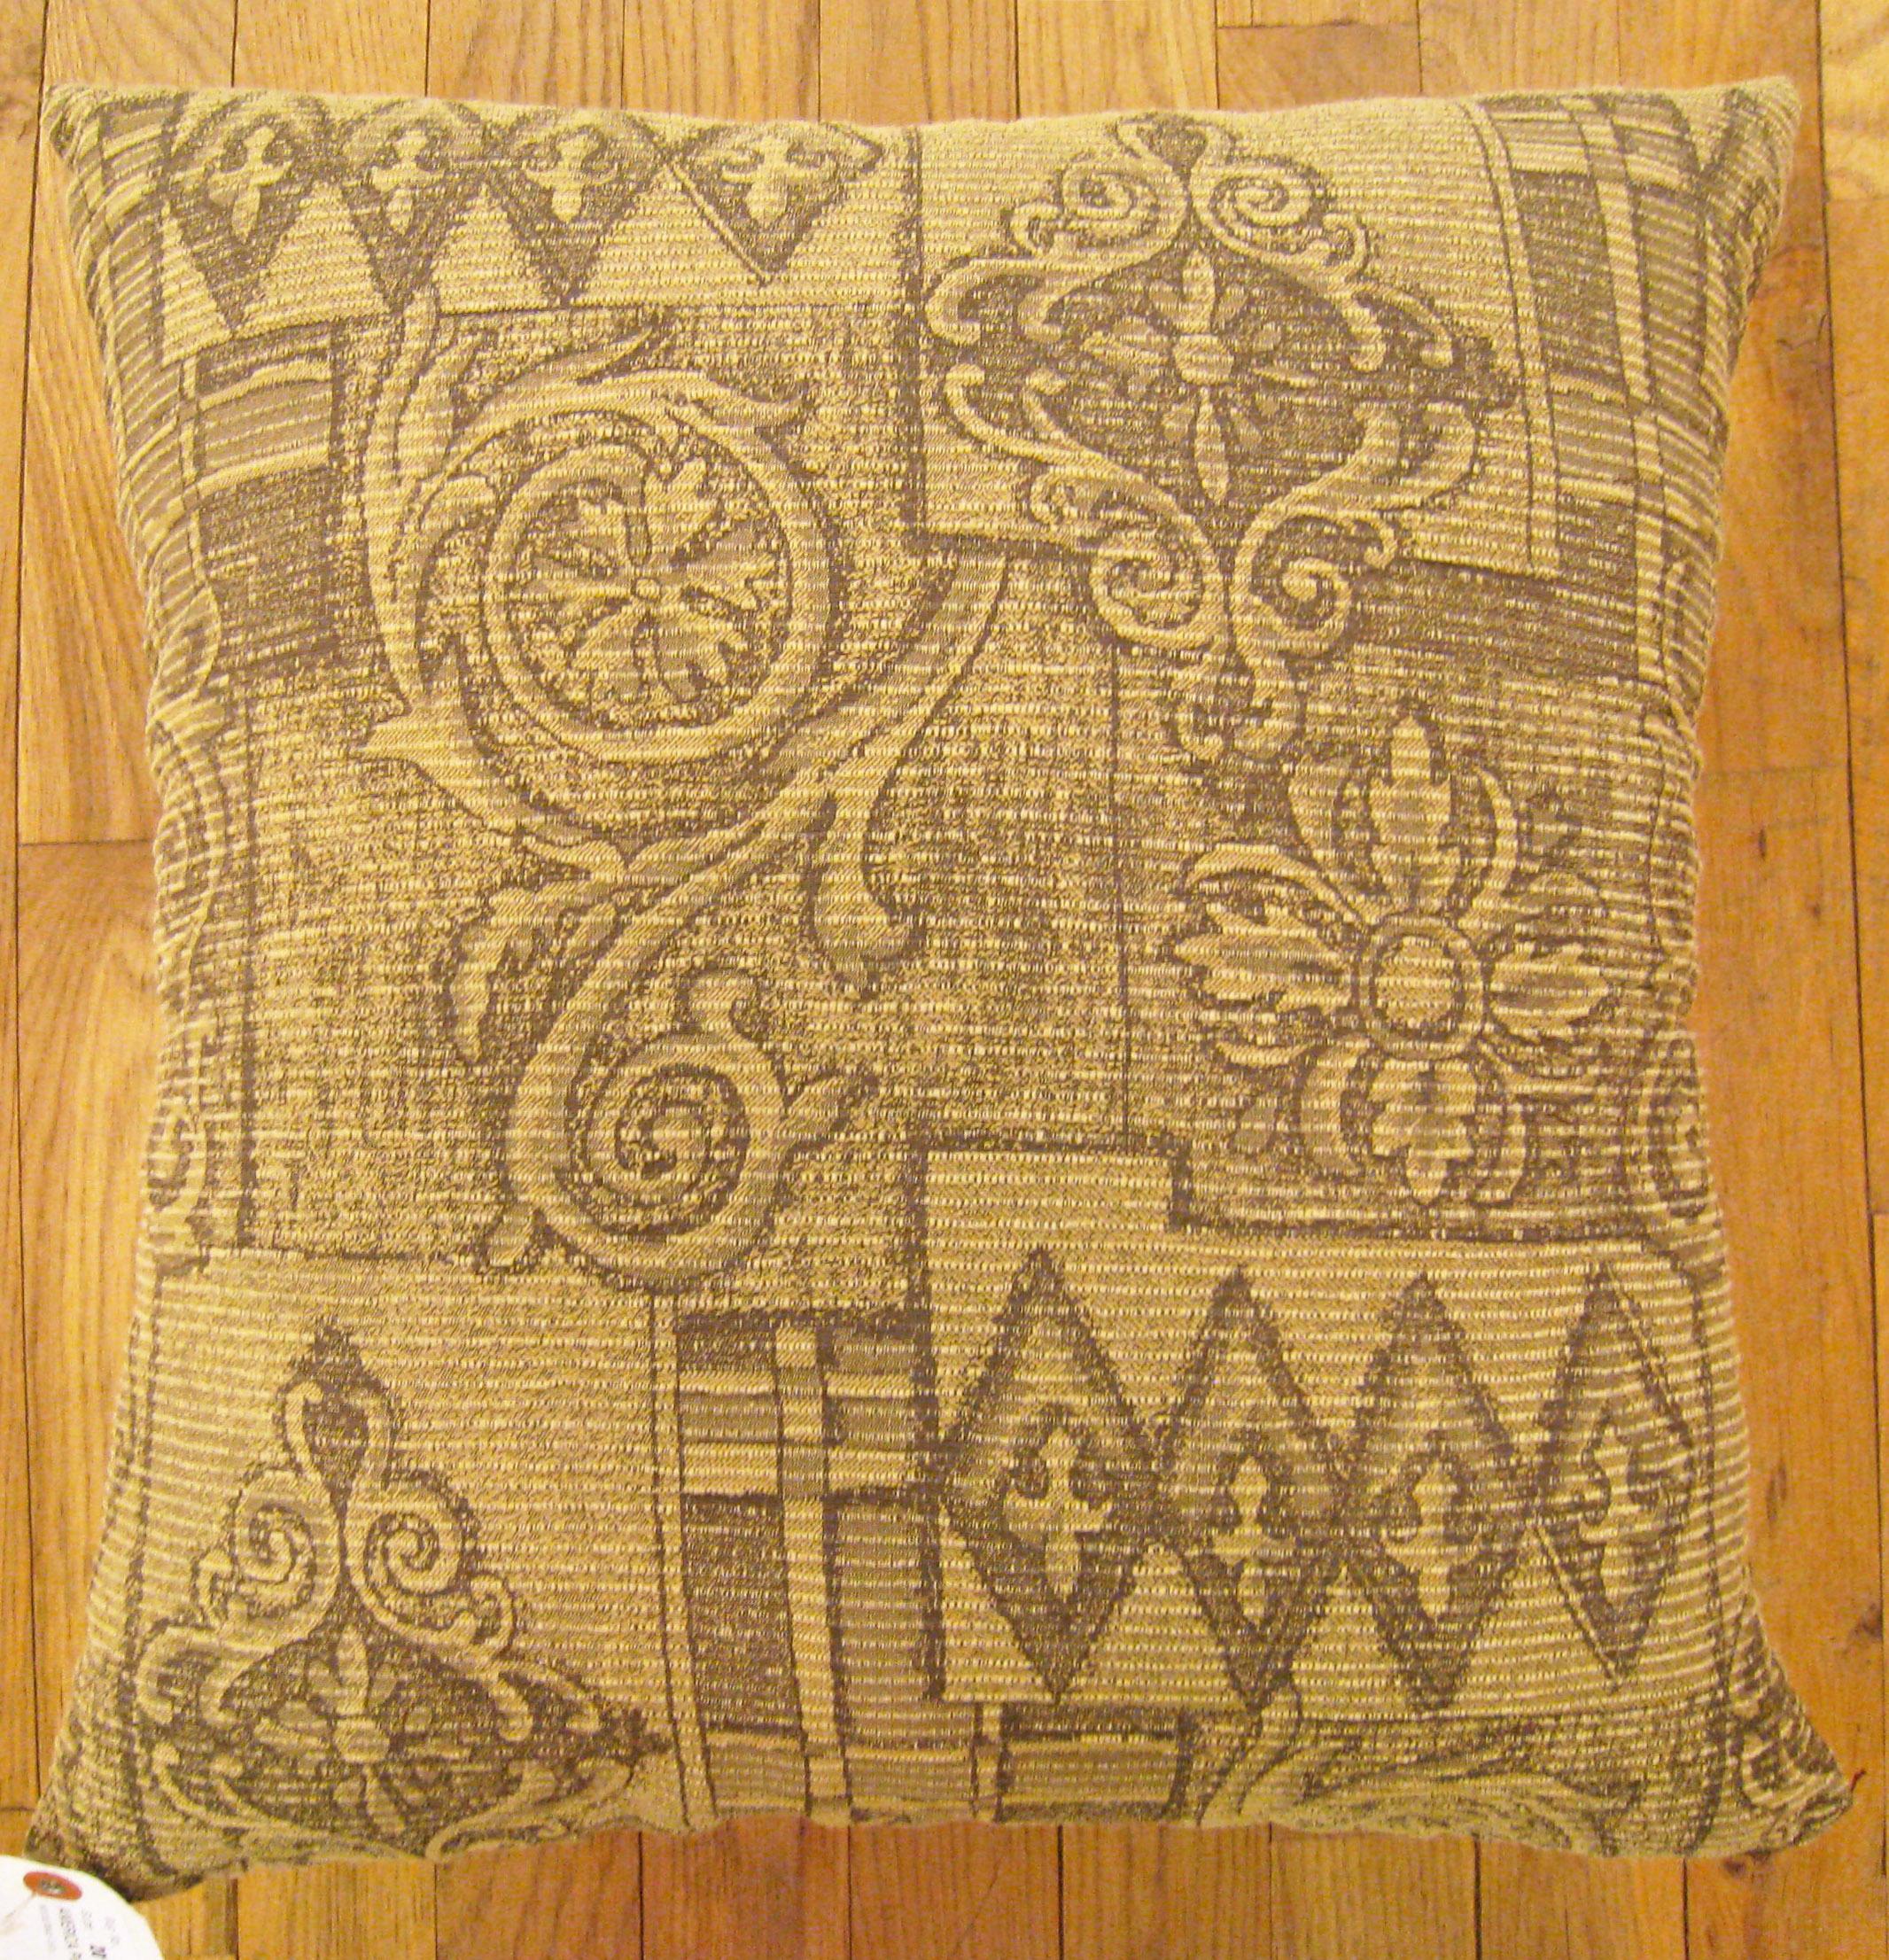 Decorative Vintage Floro-Geometric Fabric Pillow In Good Condition For Sale In New York, NY